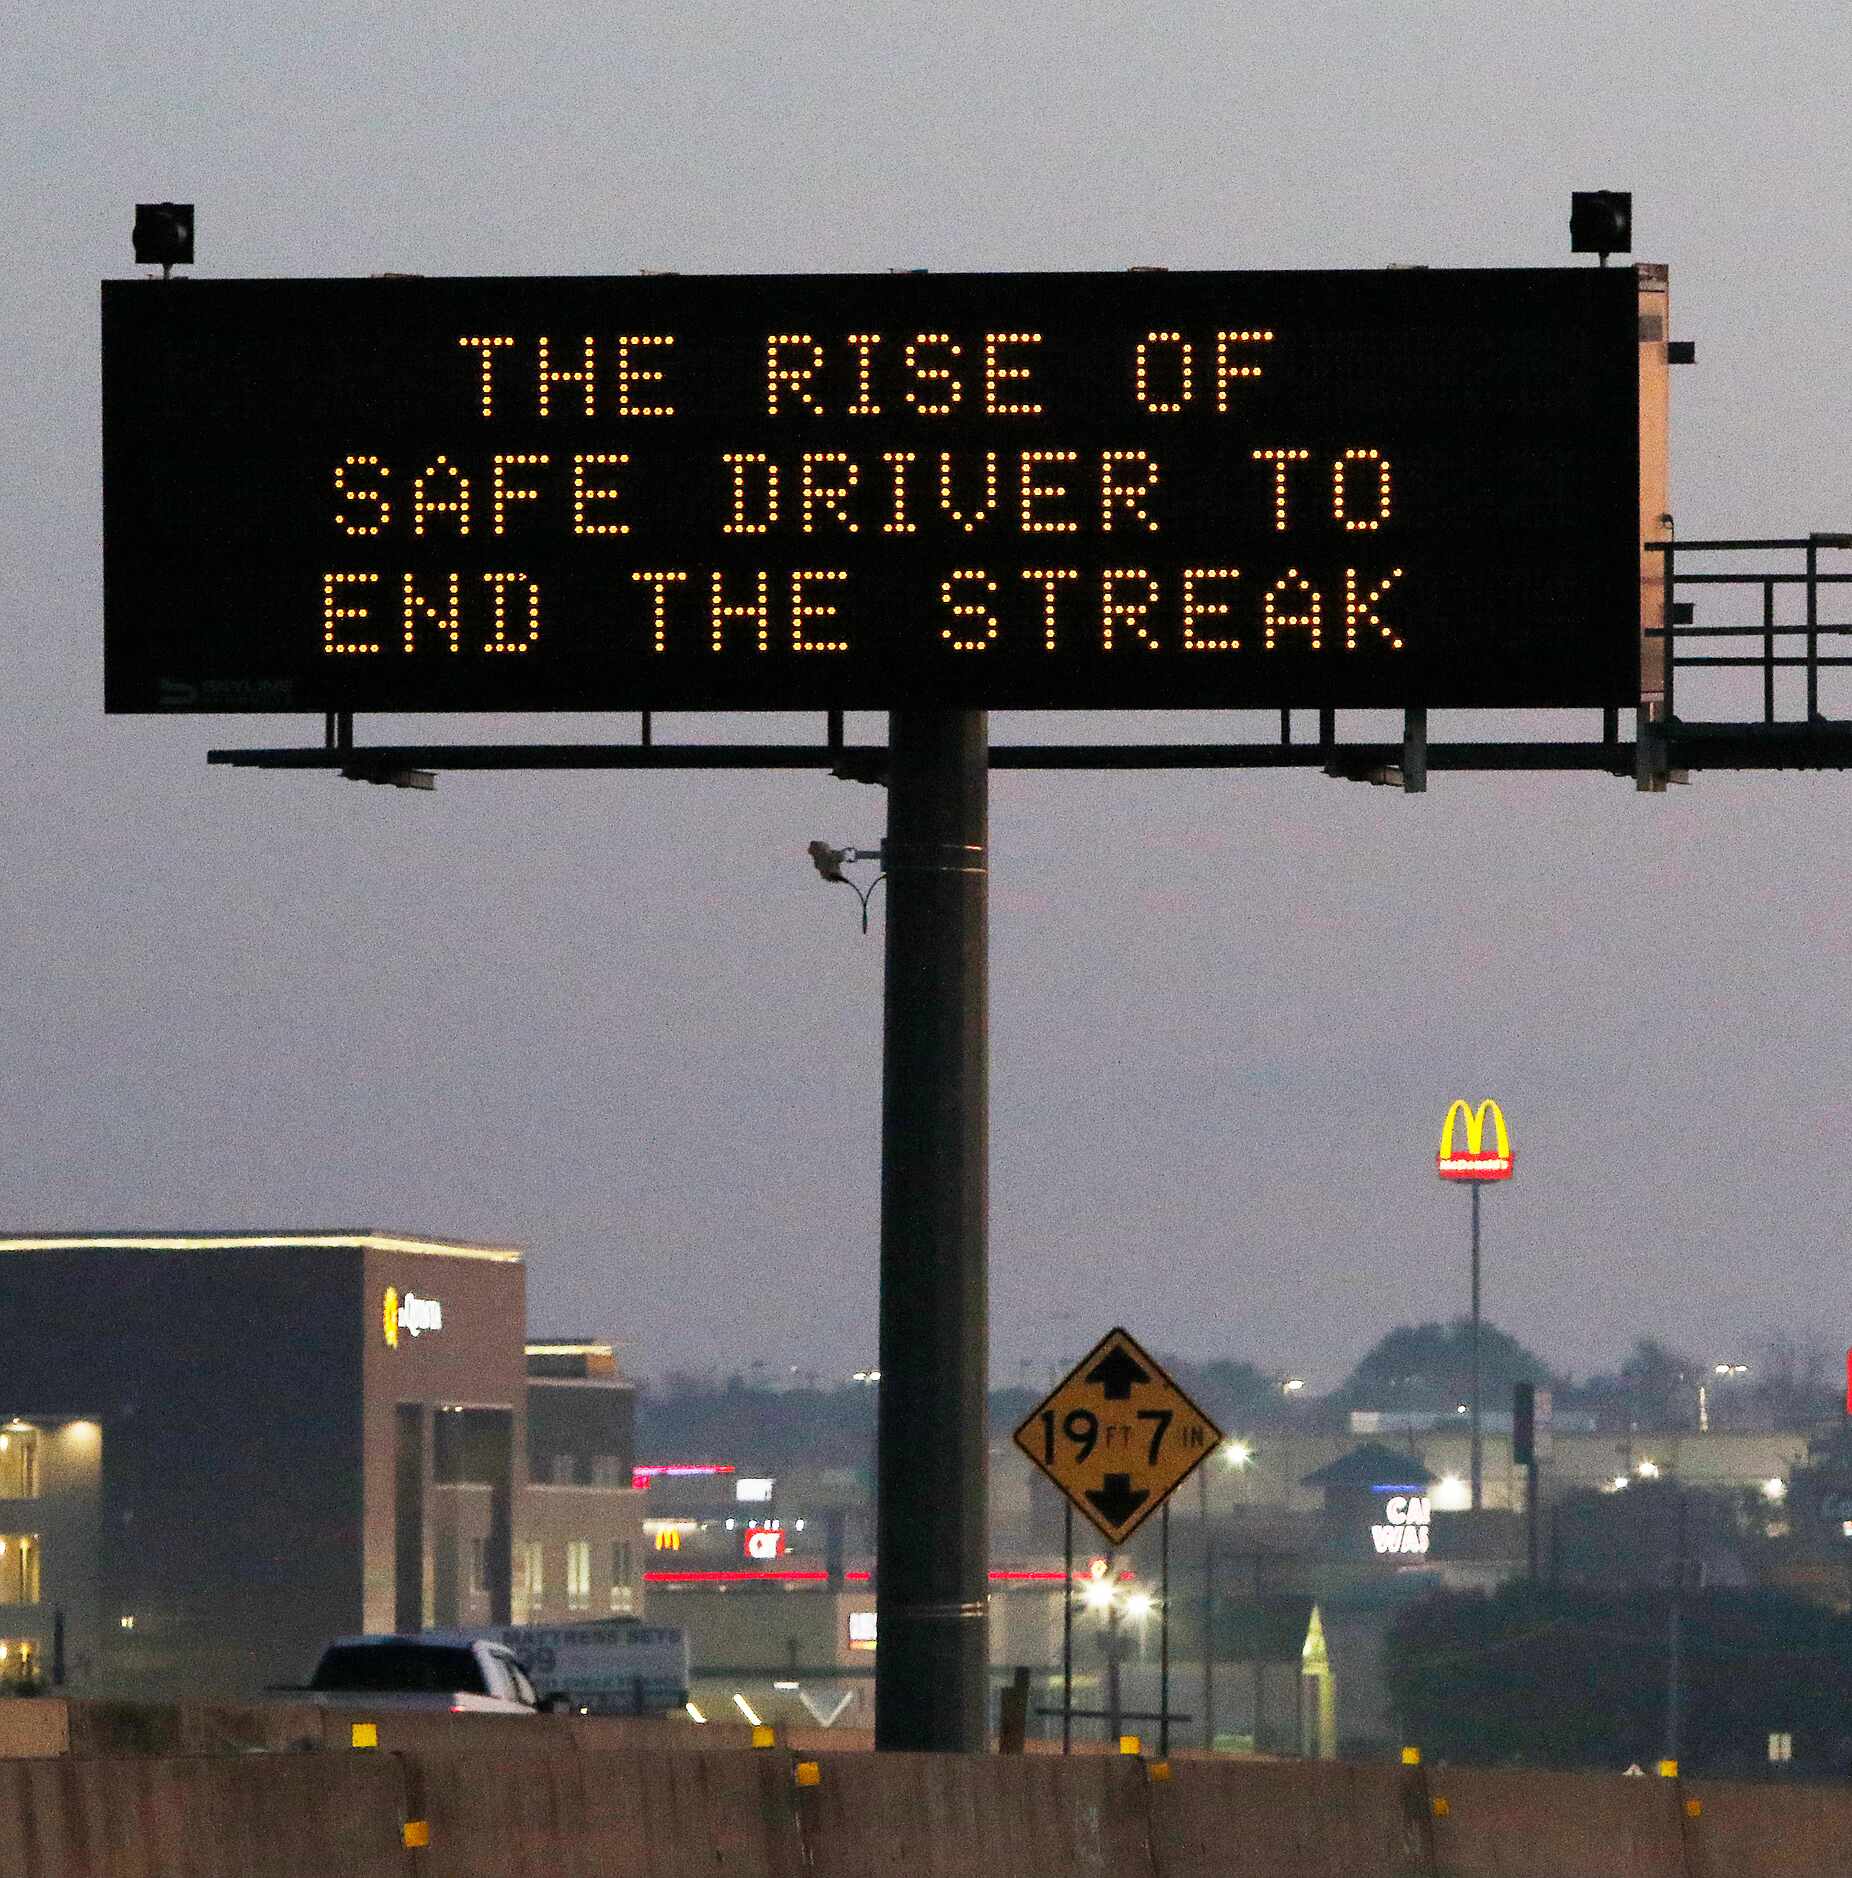 TXDOT's Safe Driver sign" THE RISE OF SAFE DRIVER TO END THE STREAK" on Highway 67 in Dallas...